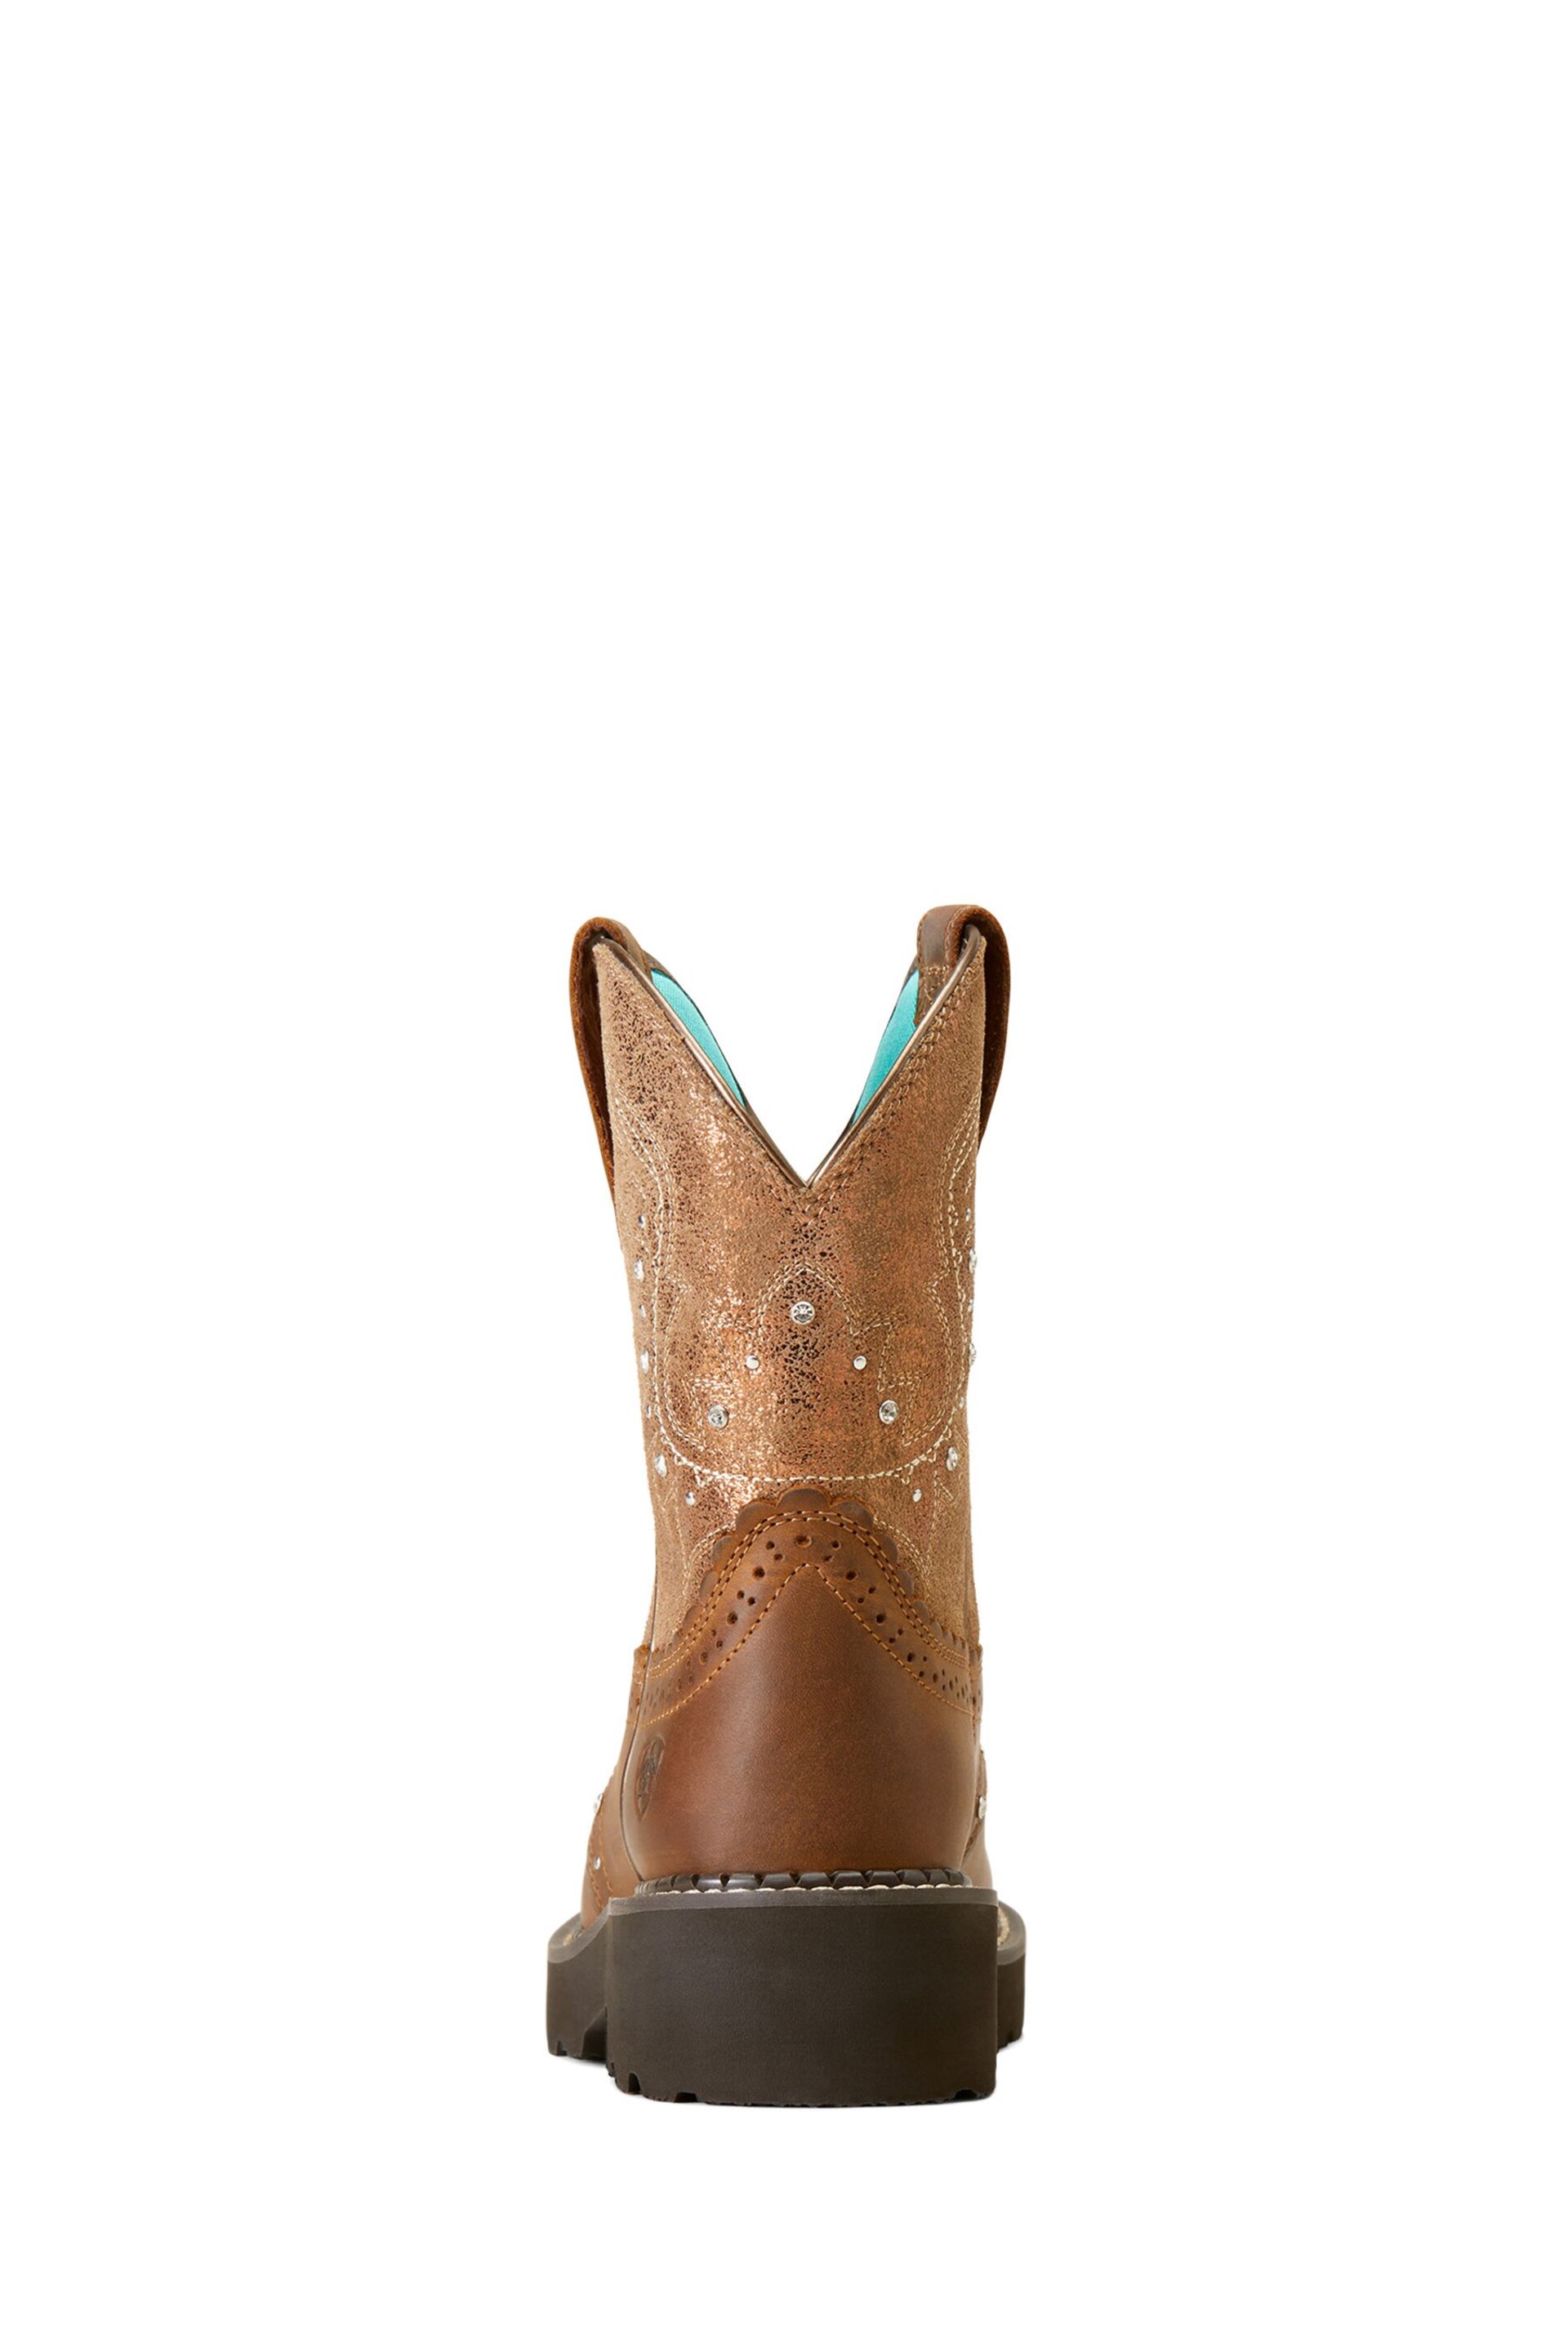 Ariat Natural Gembaby Boots - Image 3 of 3